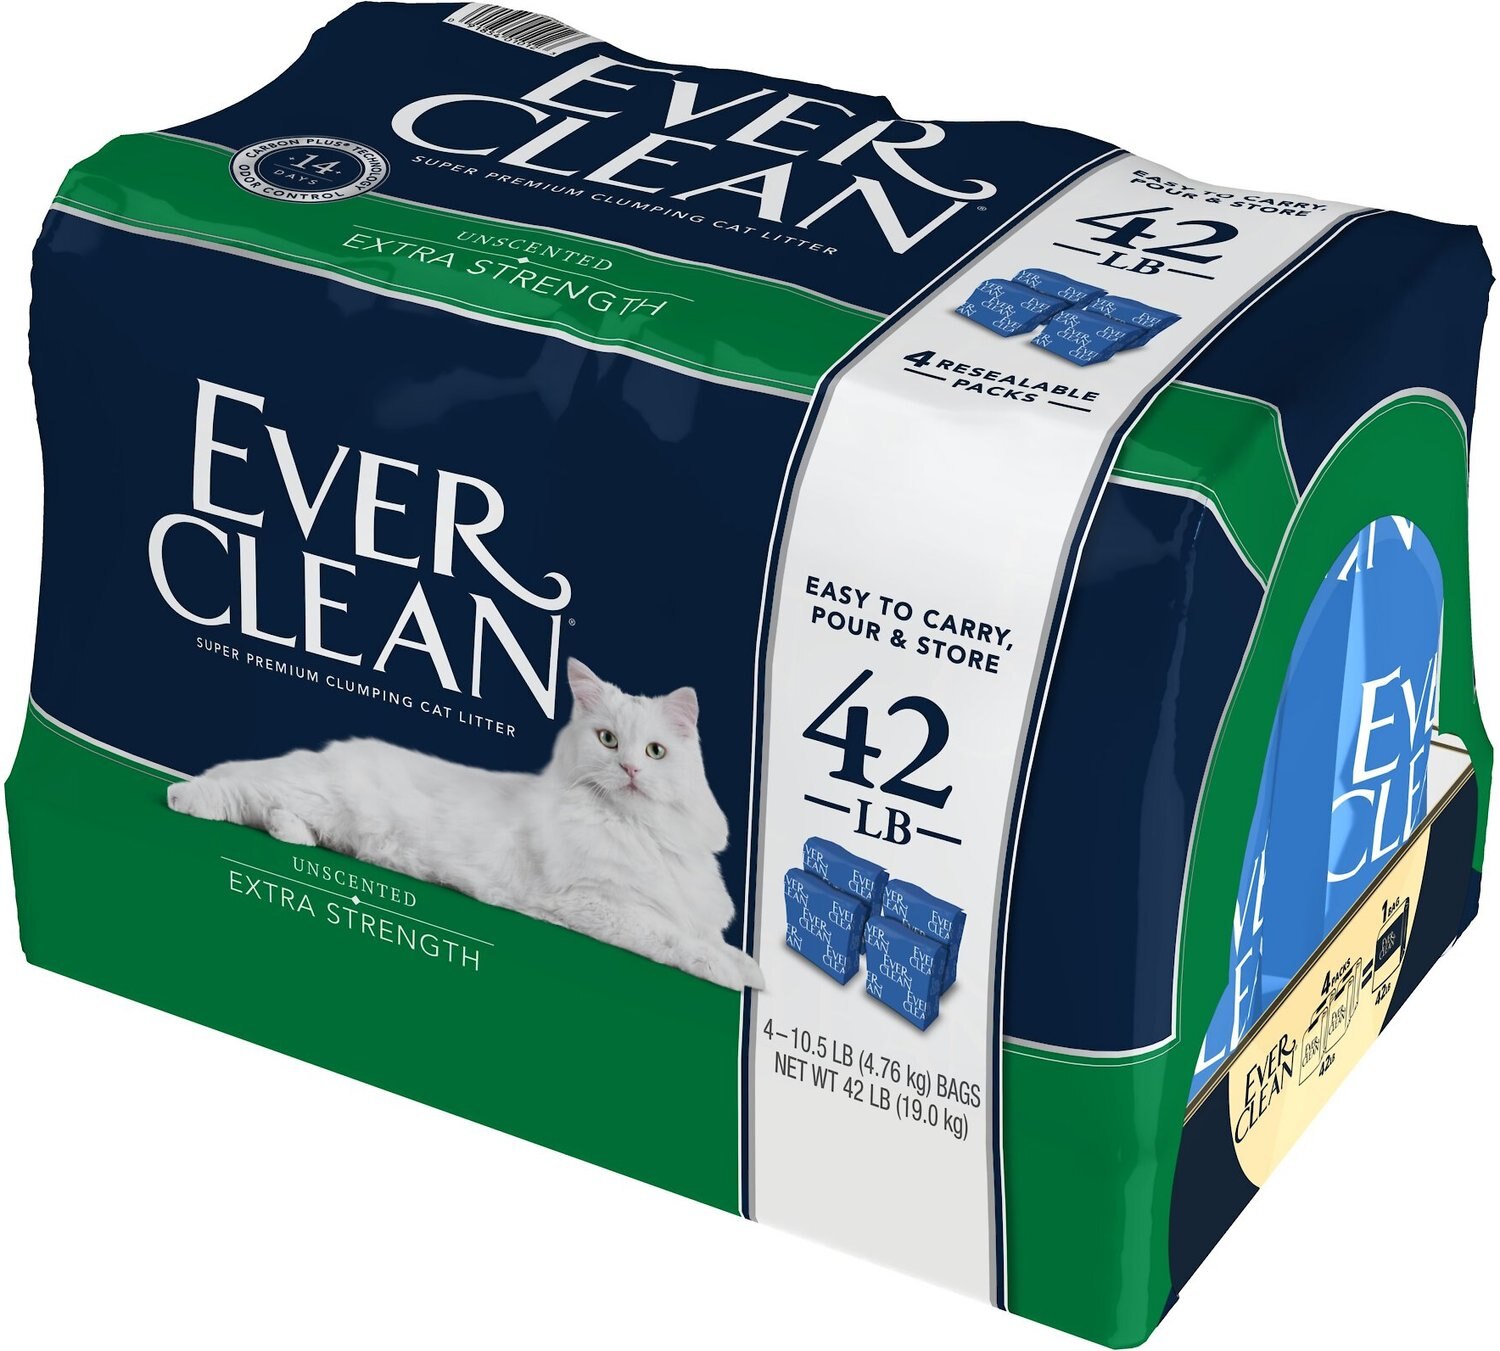 Ever Clean Extra Strength Unscented Clumping Clay Cat Litter By Ever Clean
best cat litter for litter robot